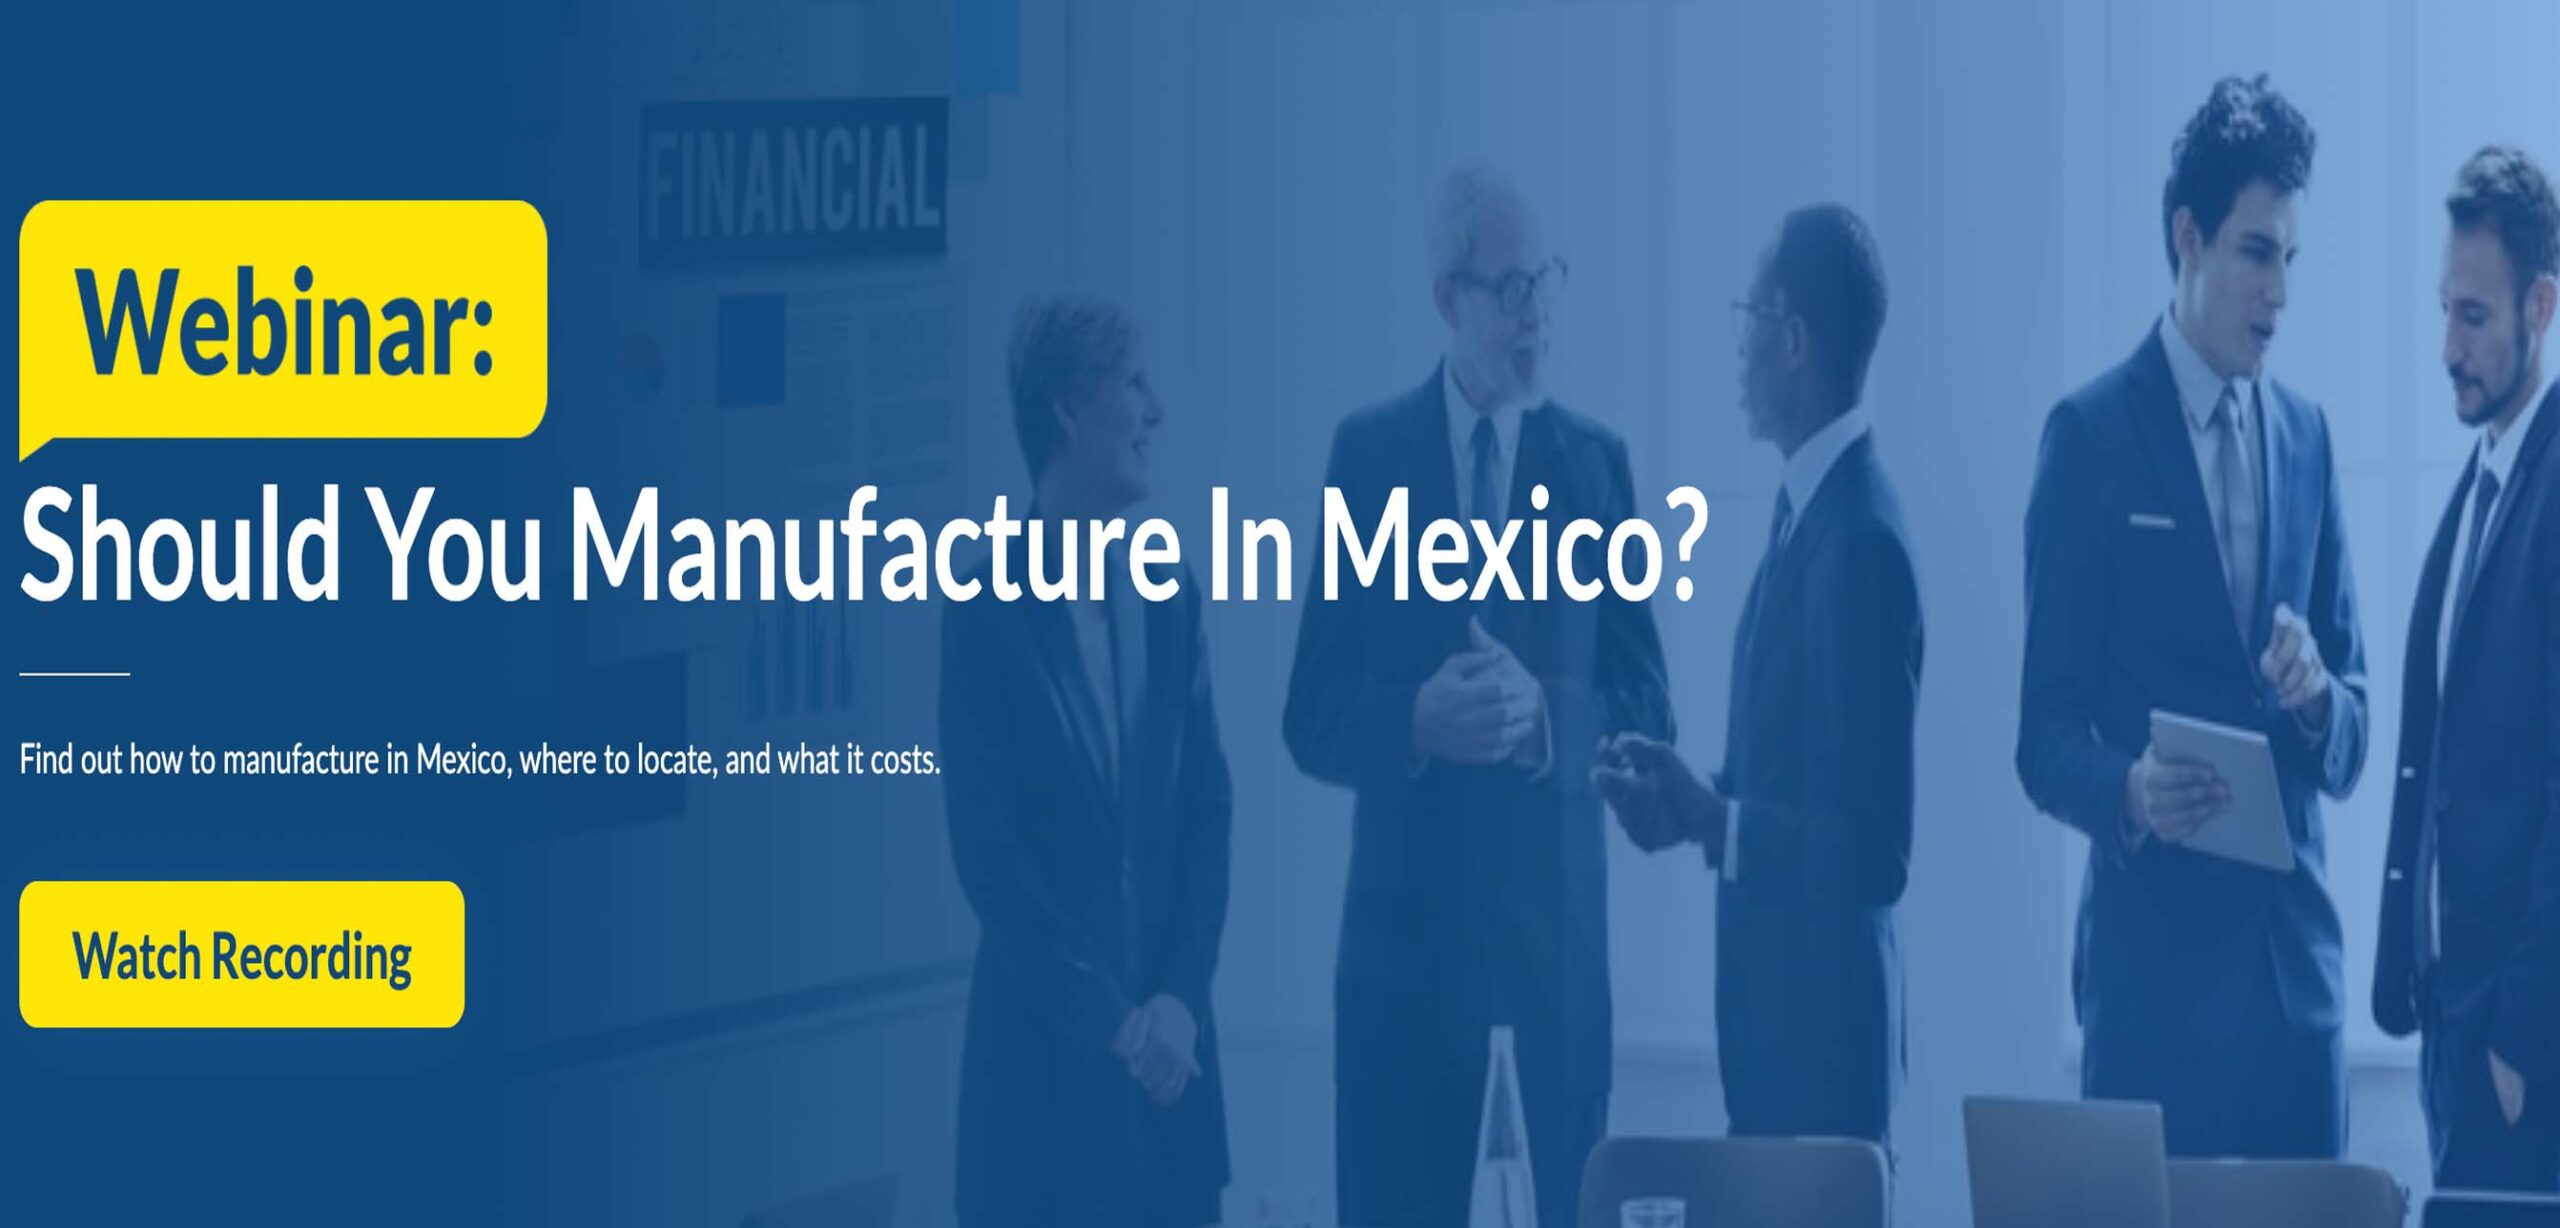 Should You Manufacture In Mexico?